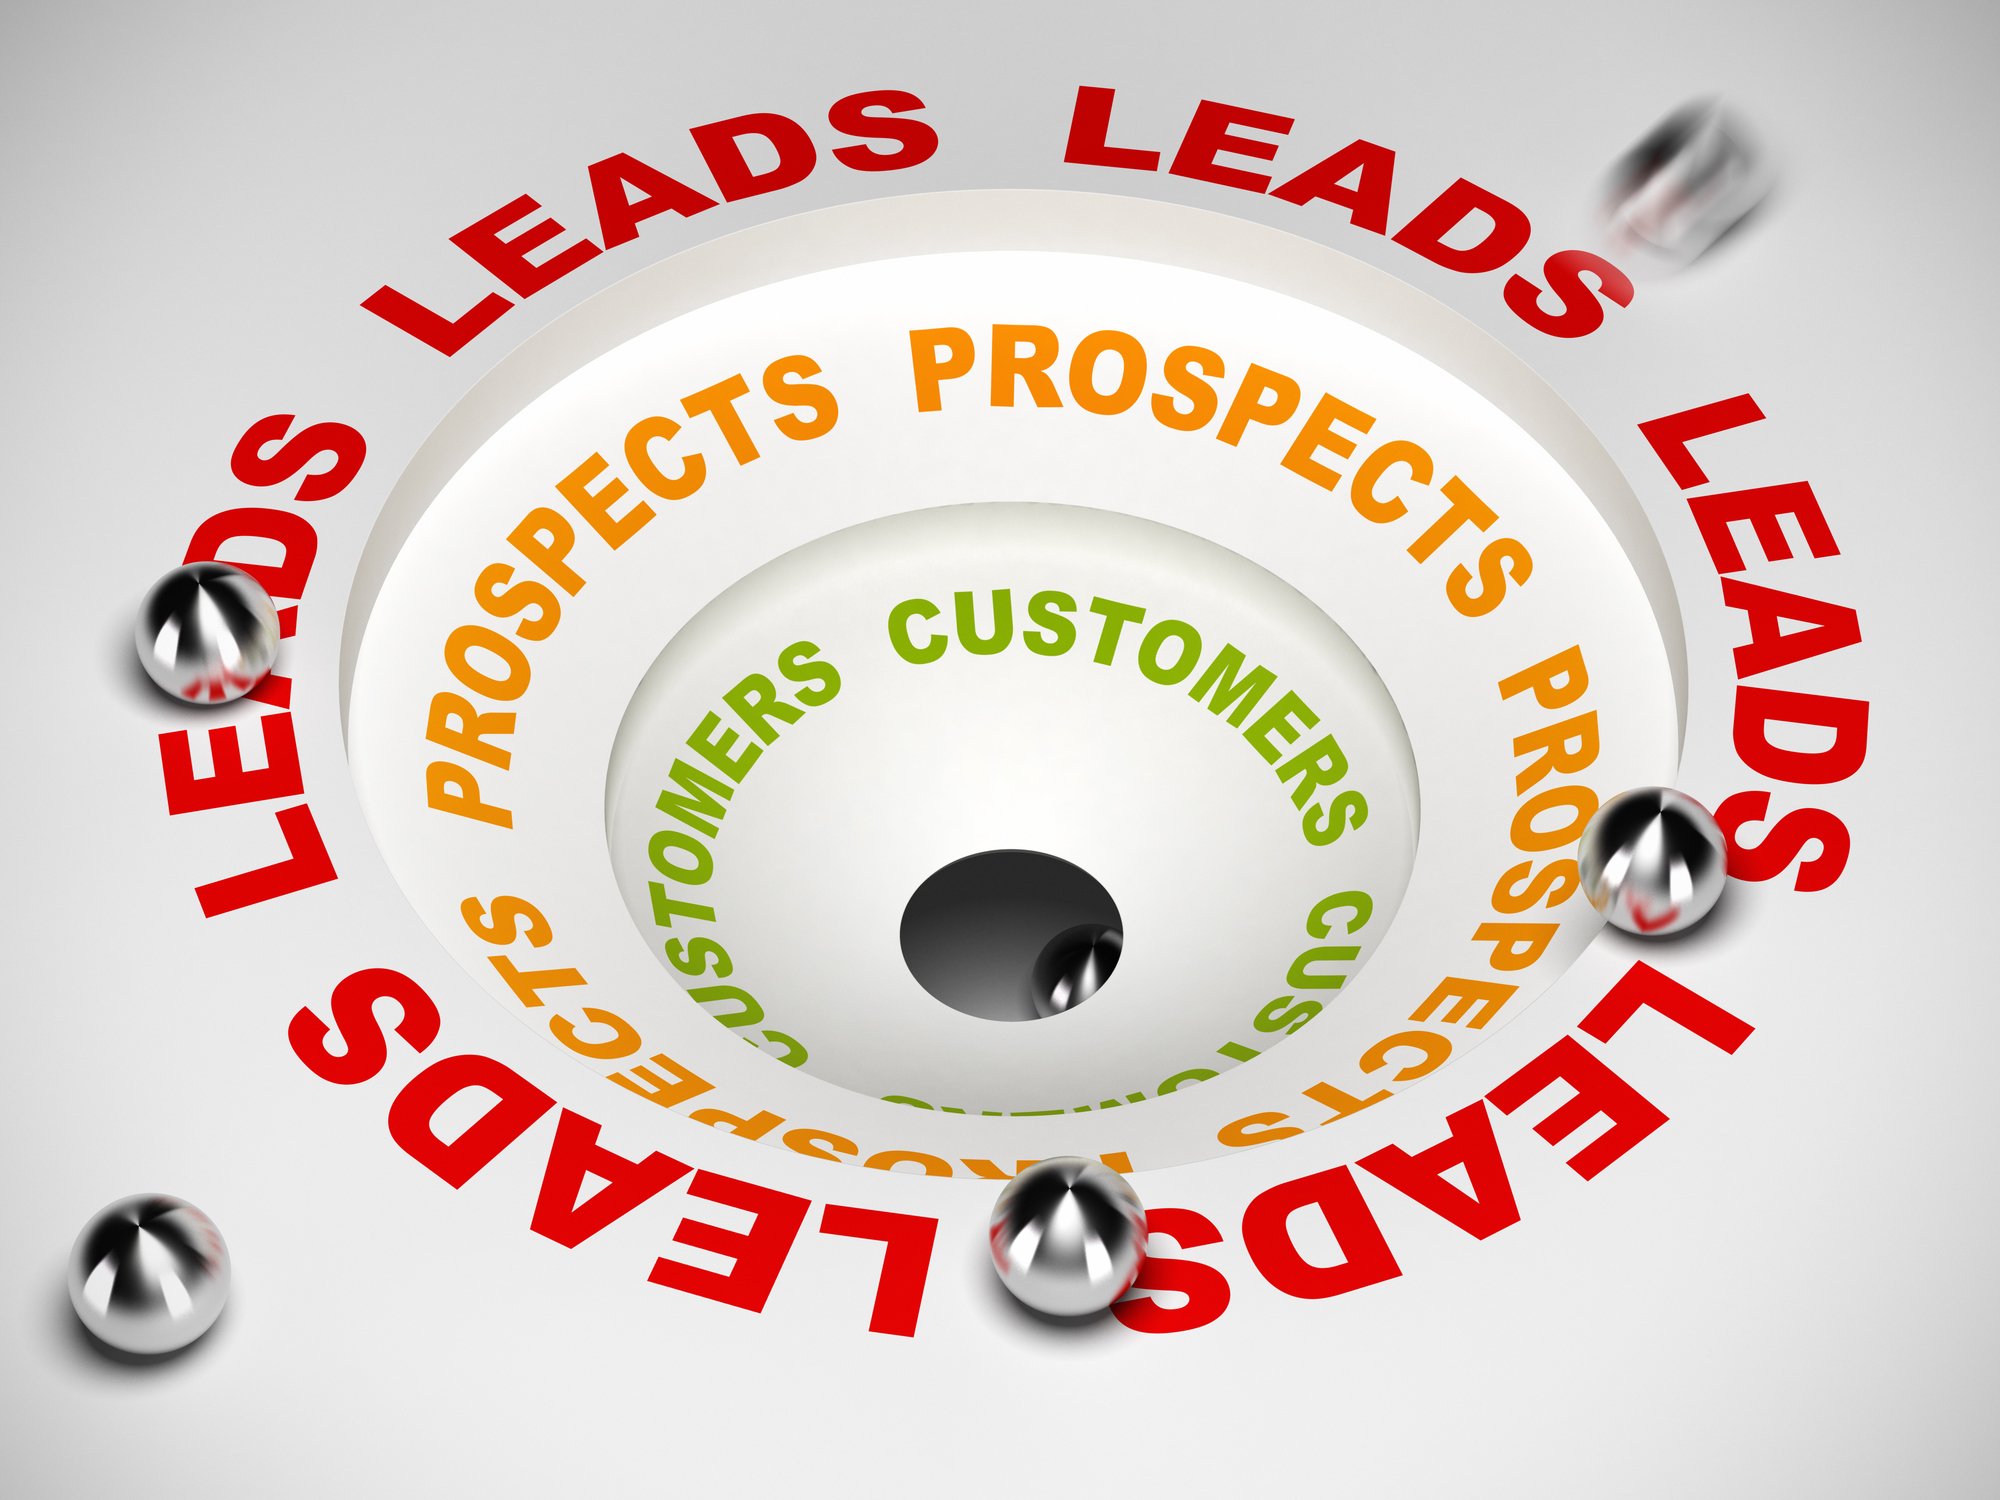 Conversion Funnel - Leads to Sales